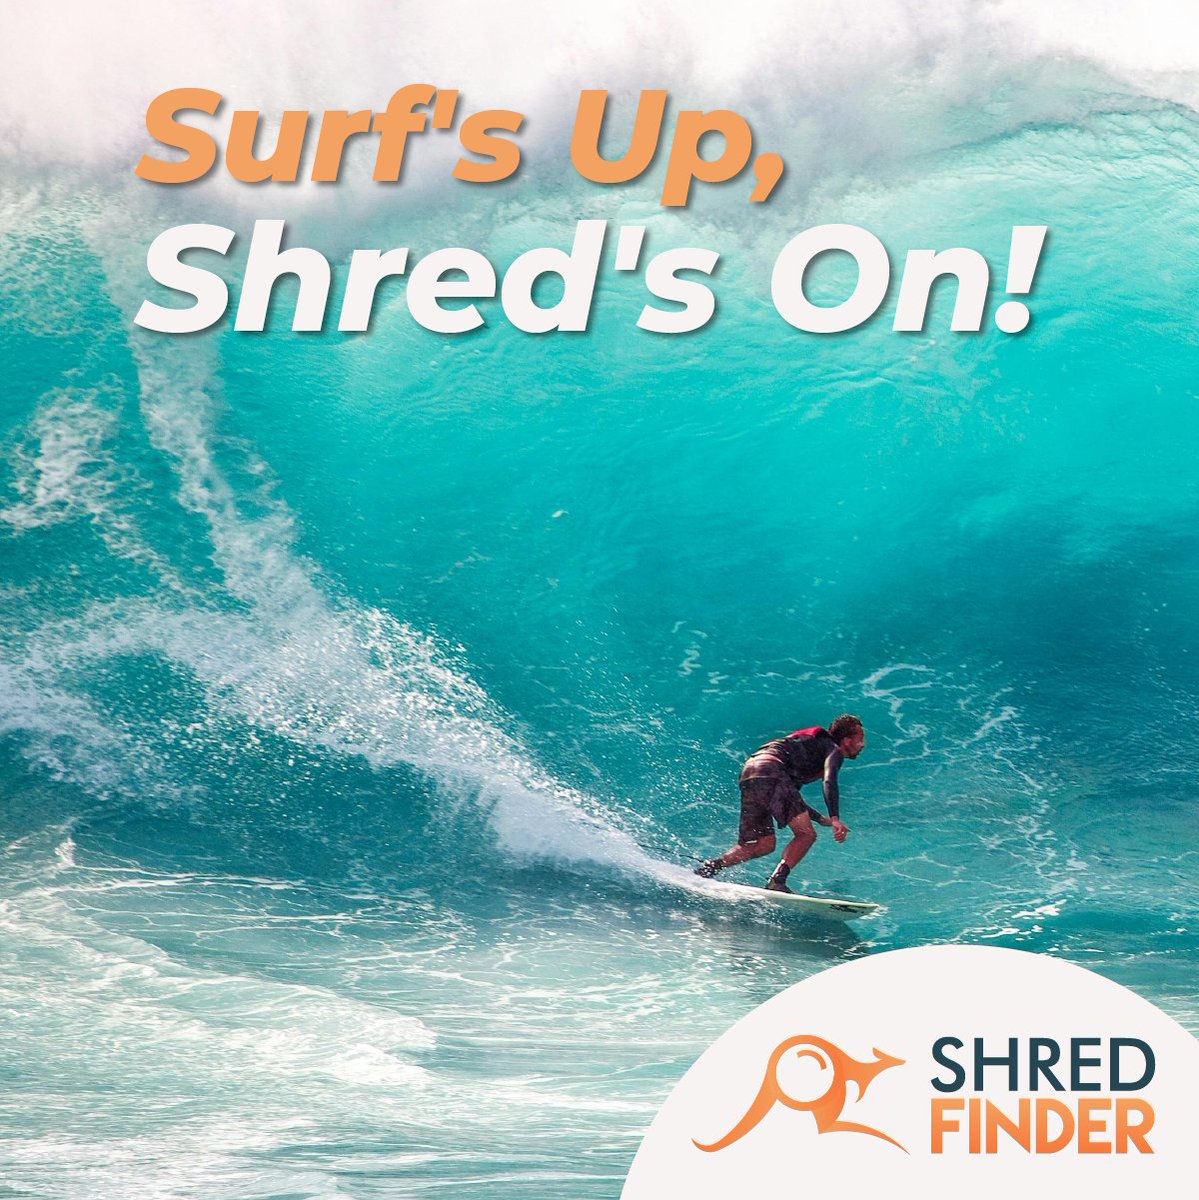 🏄‍♂️📜 'Surf's Up, Shred's On! 🏄‍♂️✨ Catch the wave of secure document destruction with Shred Finder. Enjoy summer vibes without the paperwork stress. 🌺🔒 #summerwaves #ShreddingSeason